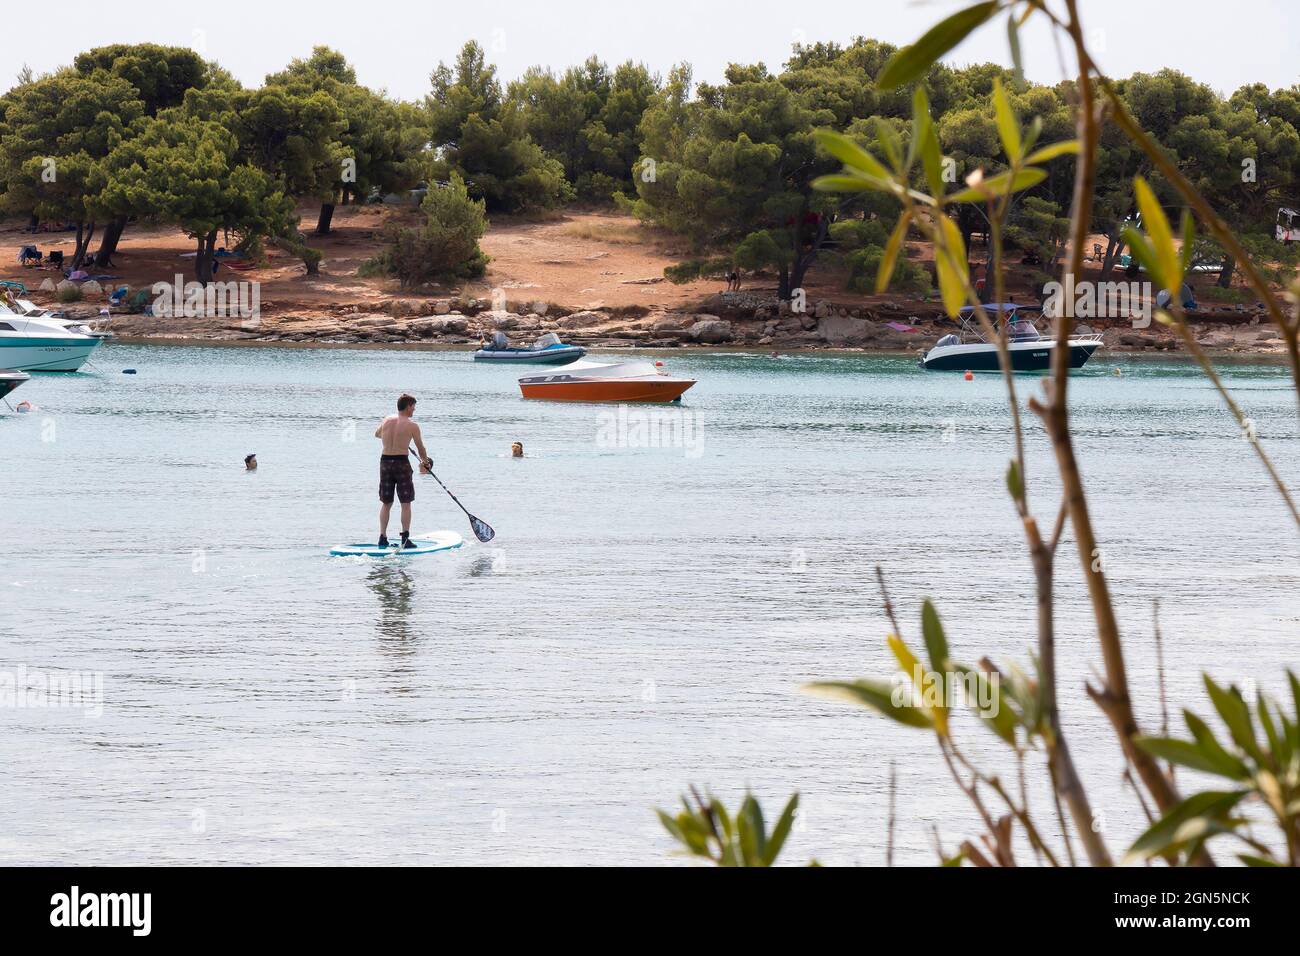 Kosirina, Murter, Croatia - August 24, 2021: People paddling on stand up boards and swimming and boats moored in a calm bay and pine trees beach Stock Photo